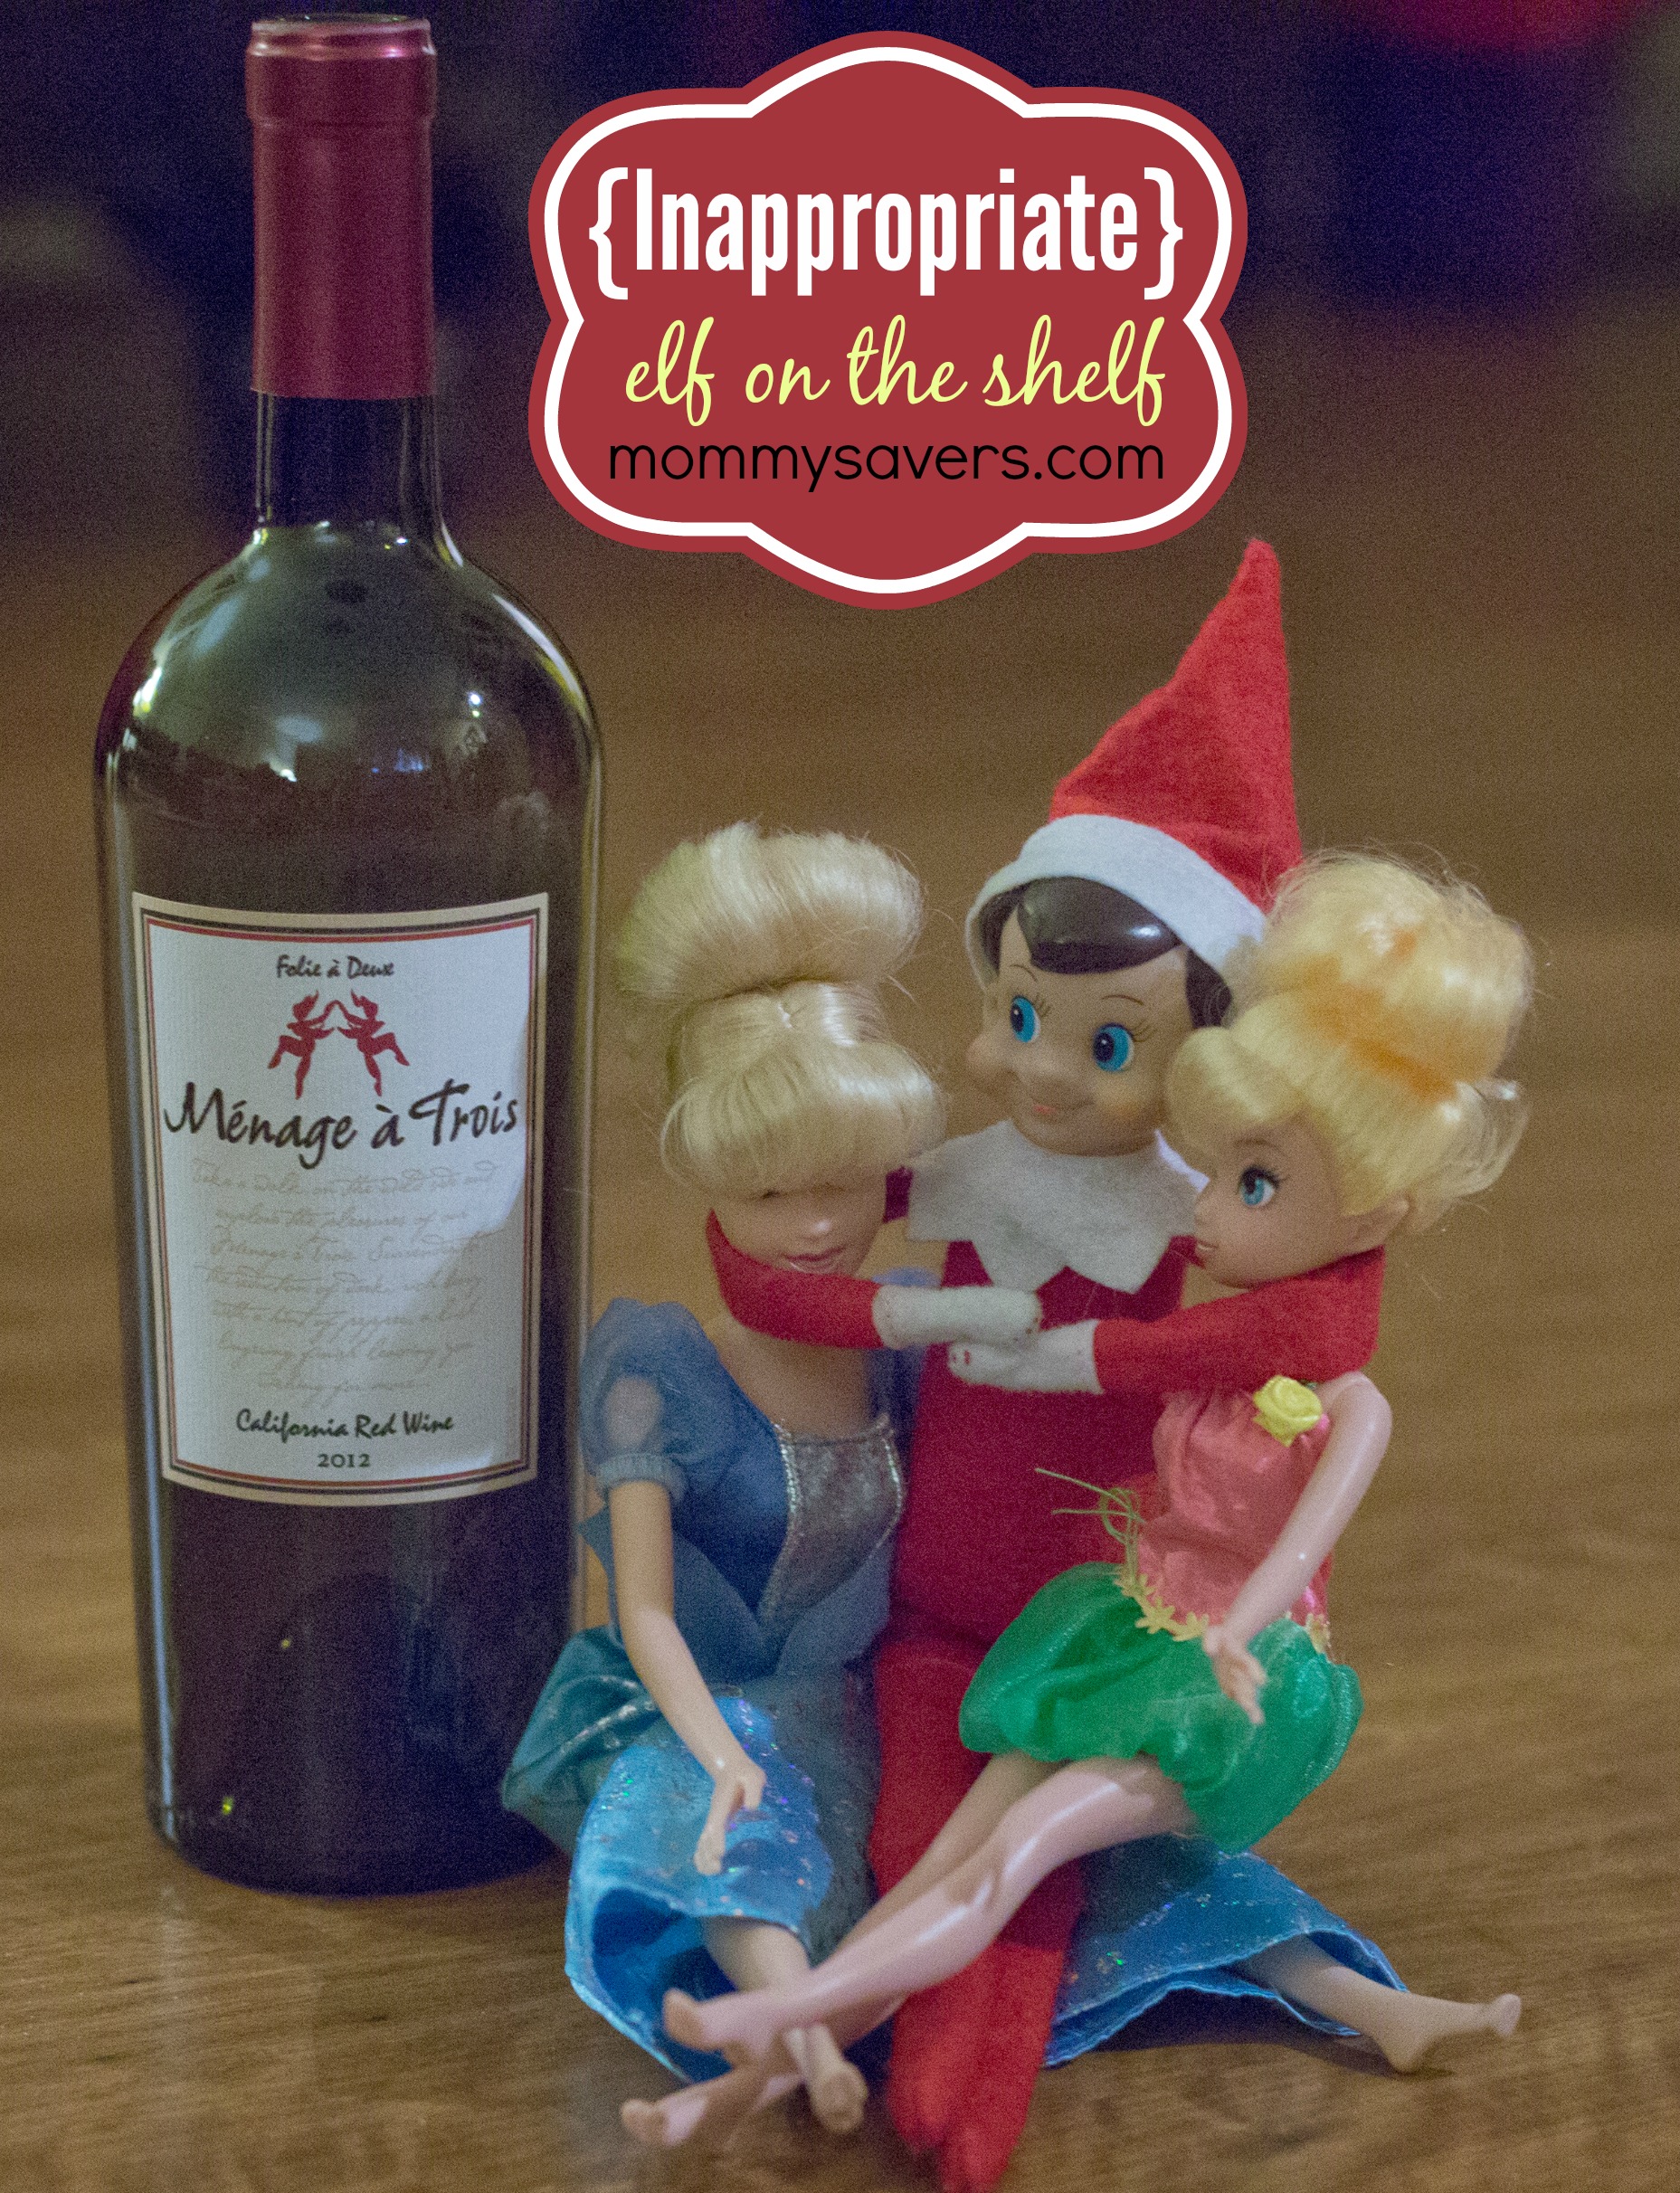 Inappropriate Elf on the Shelf Ideas (Adults ONLY!) - Mommysavers